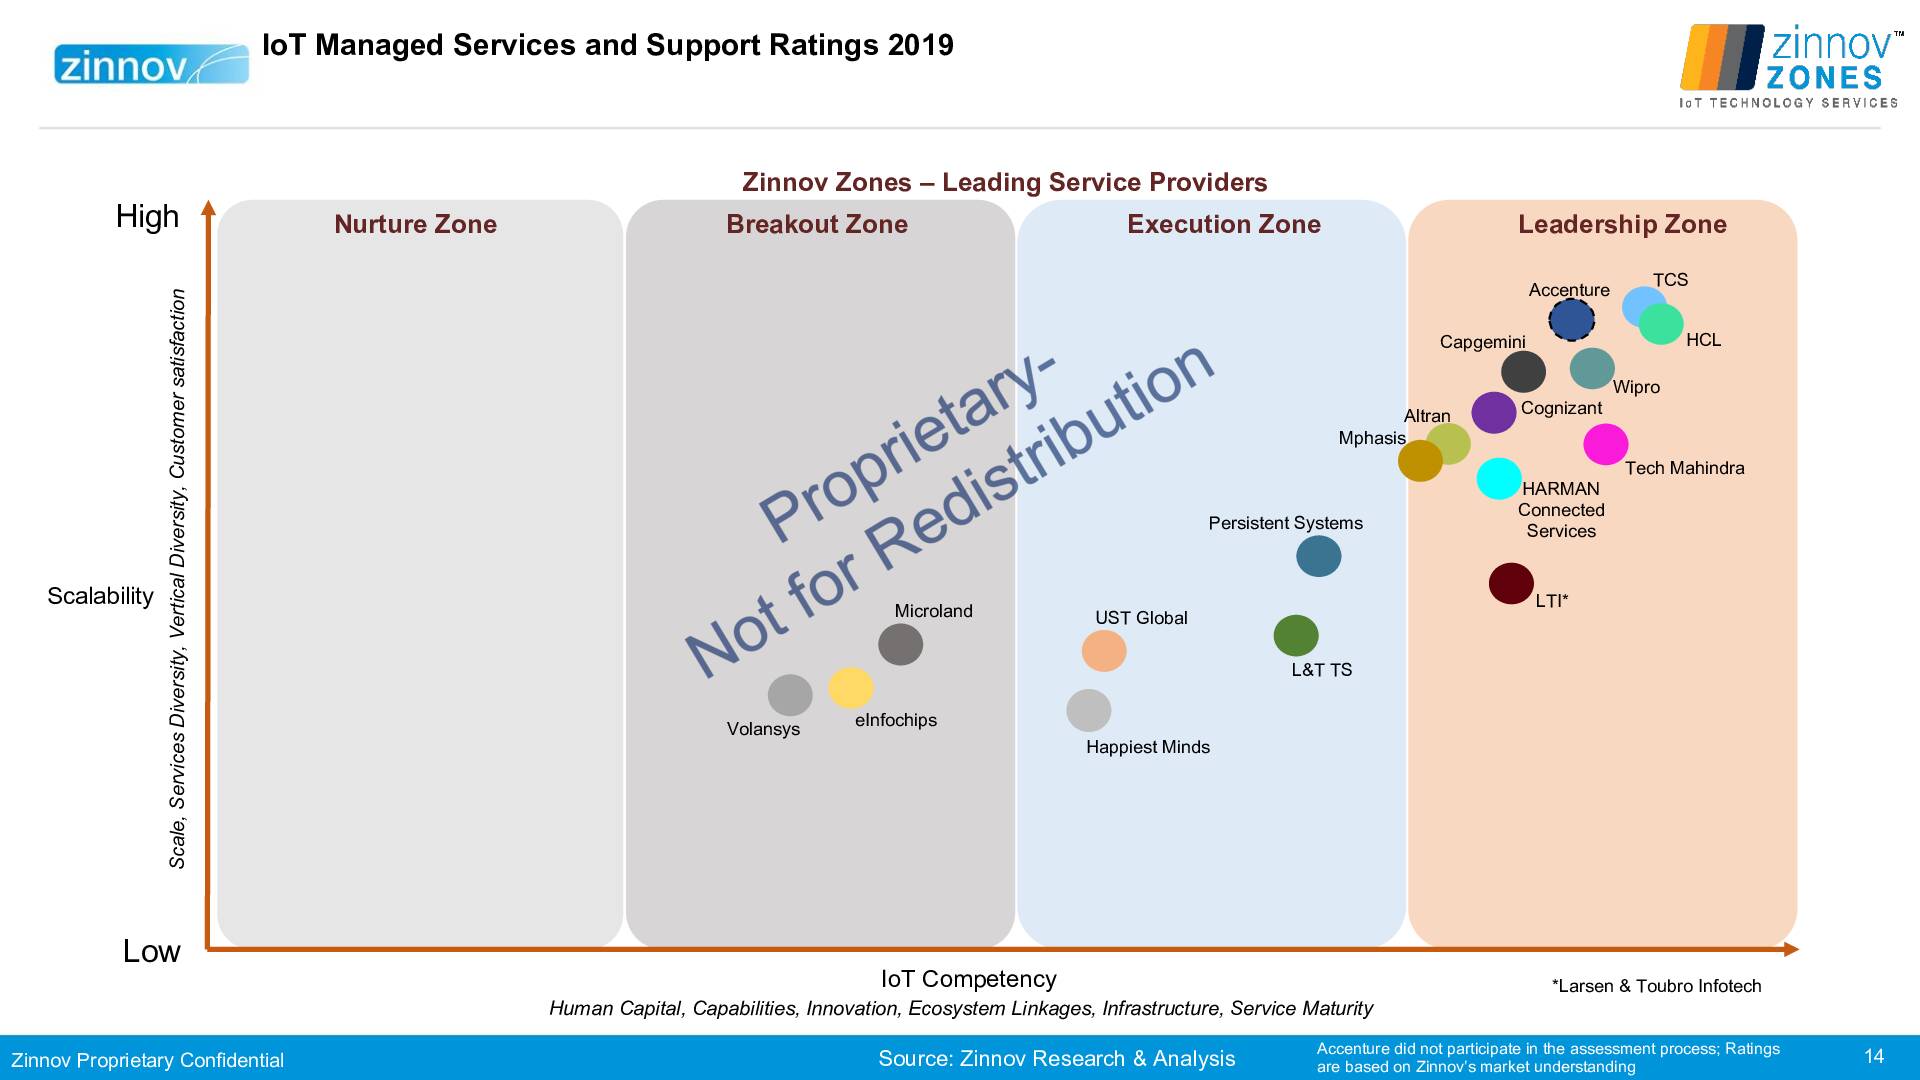 Zinnov Zones Iot Technology Services 2019 Ratings14